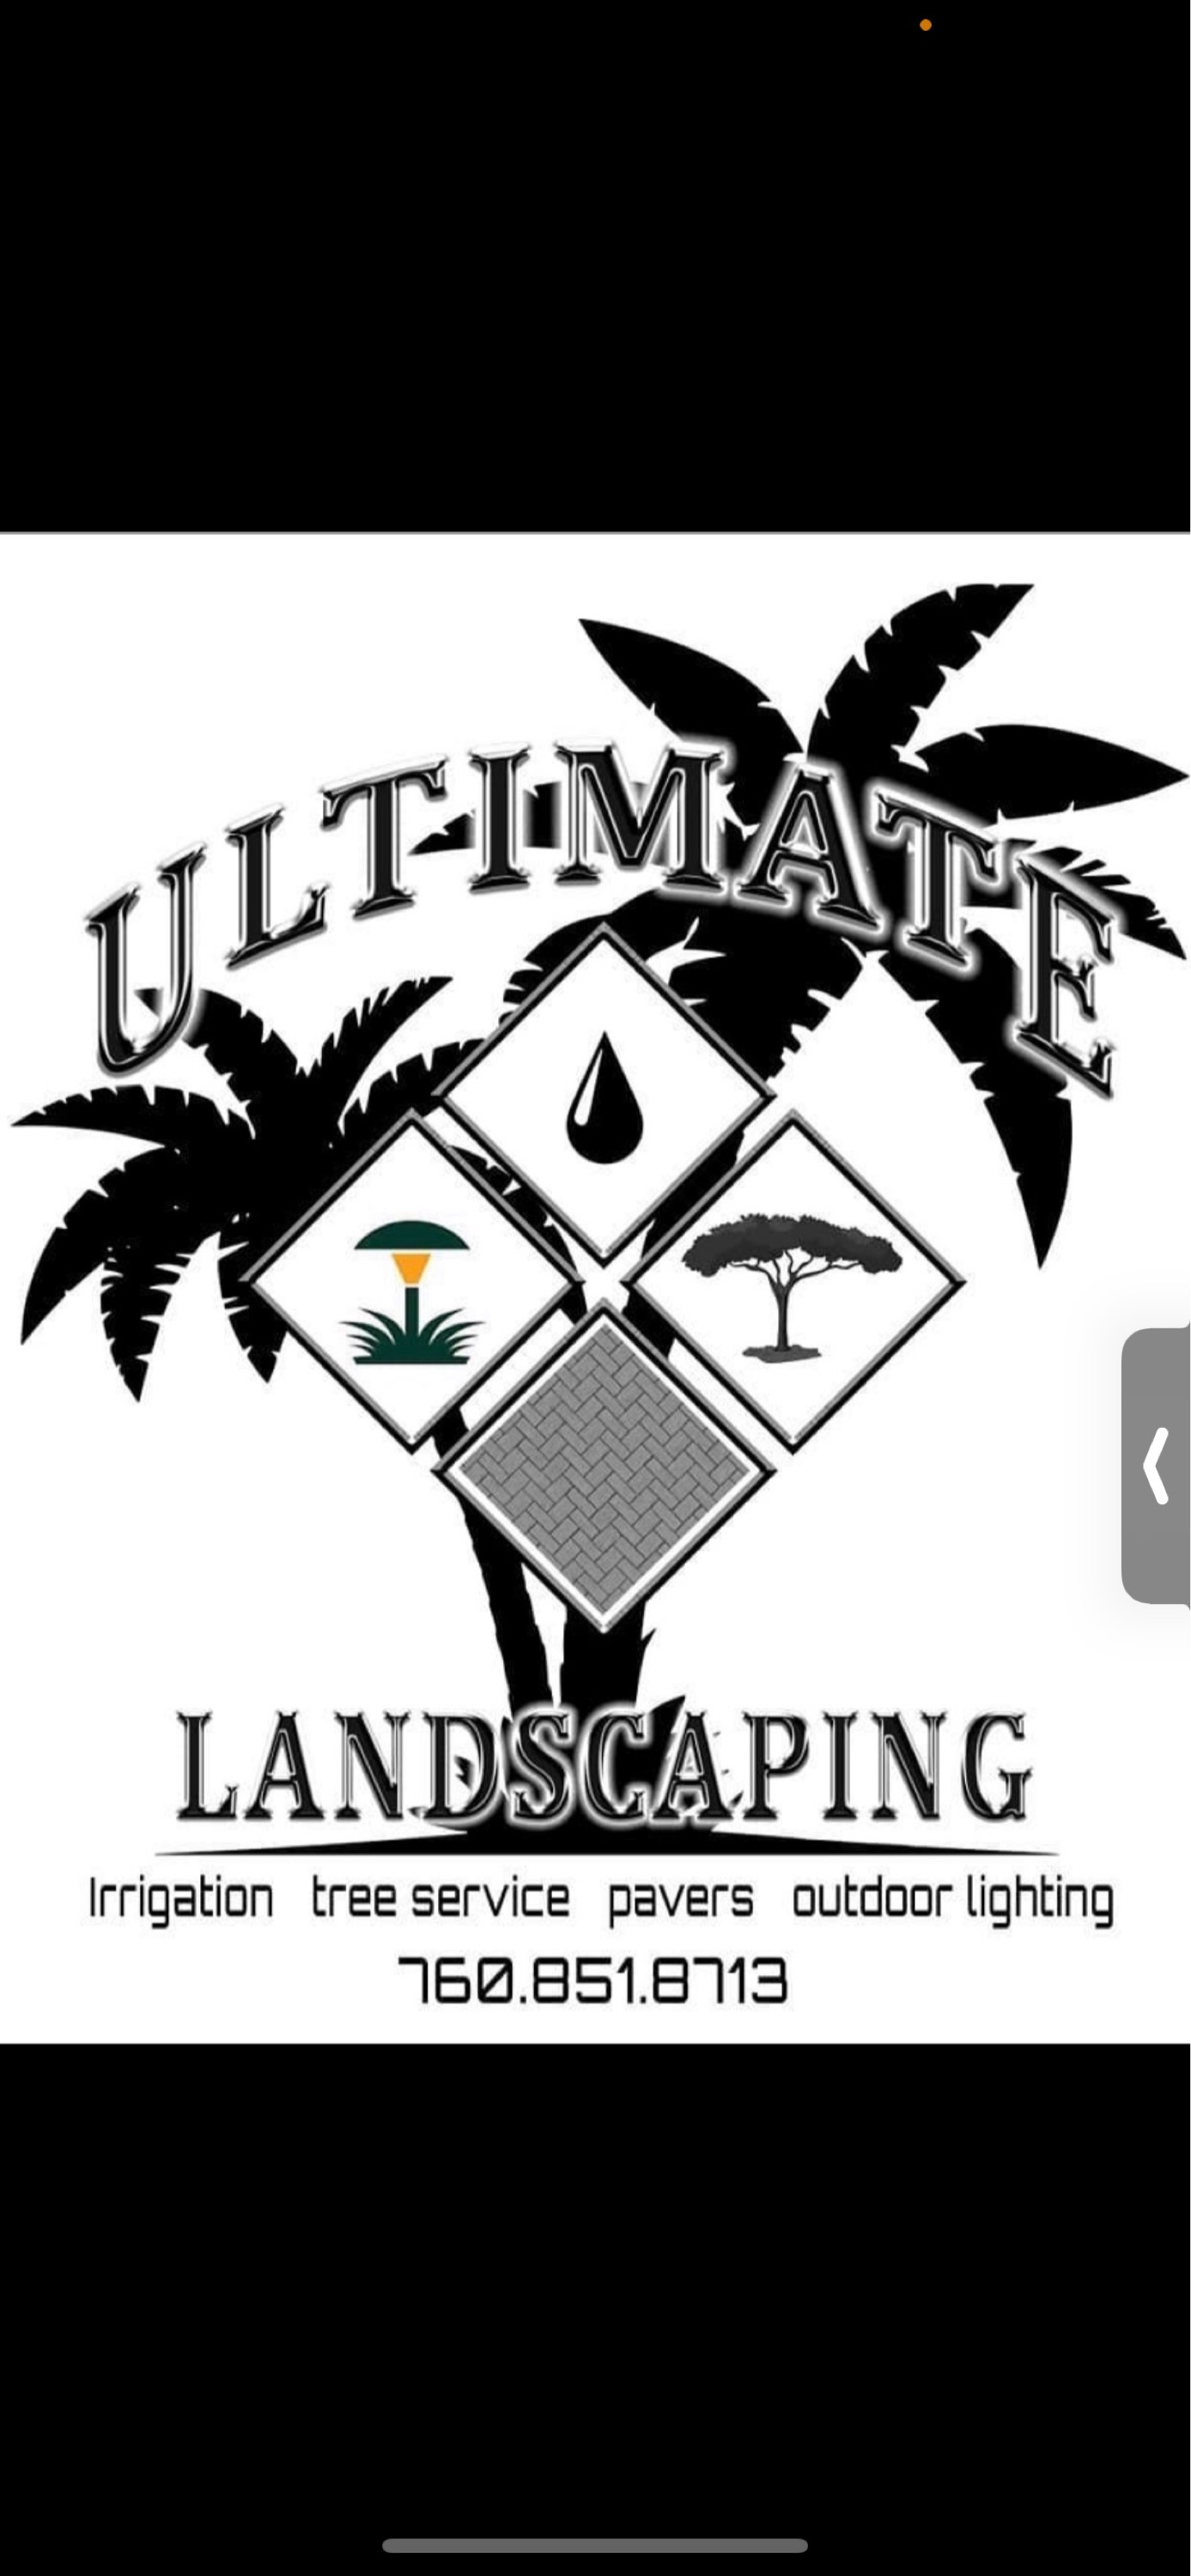 Ultimate Landscaping-Unlicensed Contractor Logo